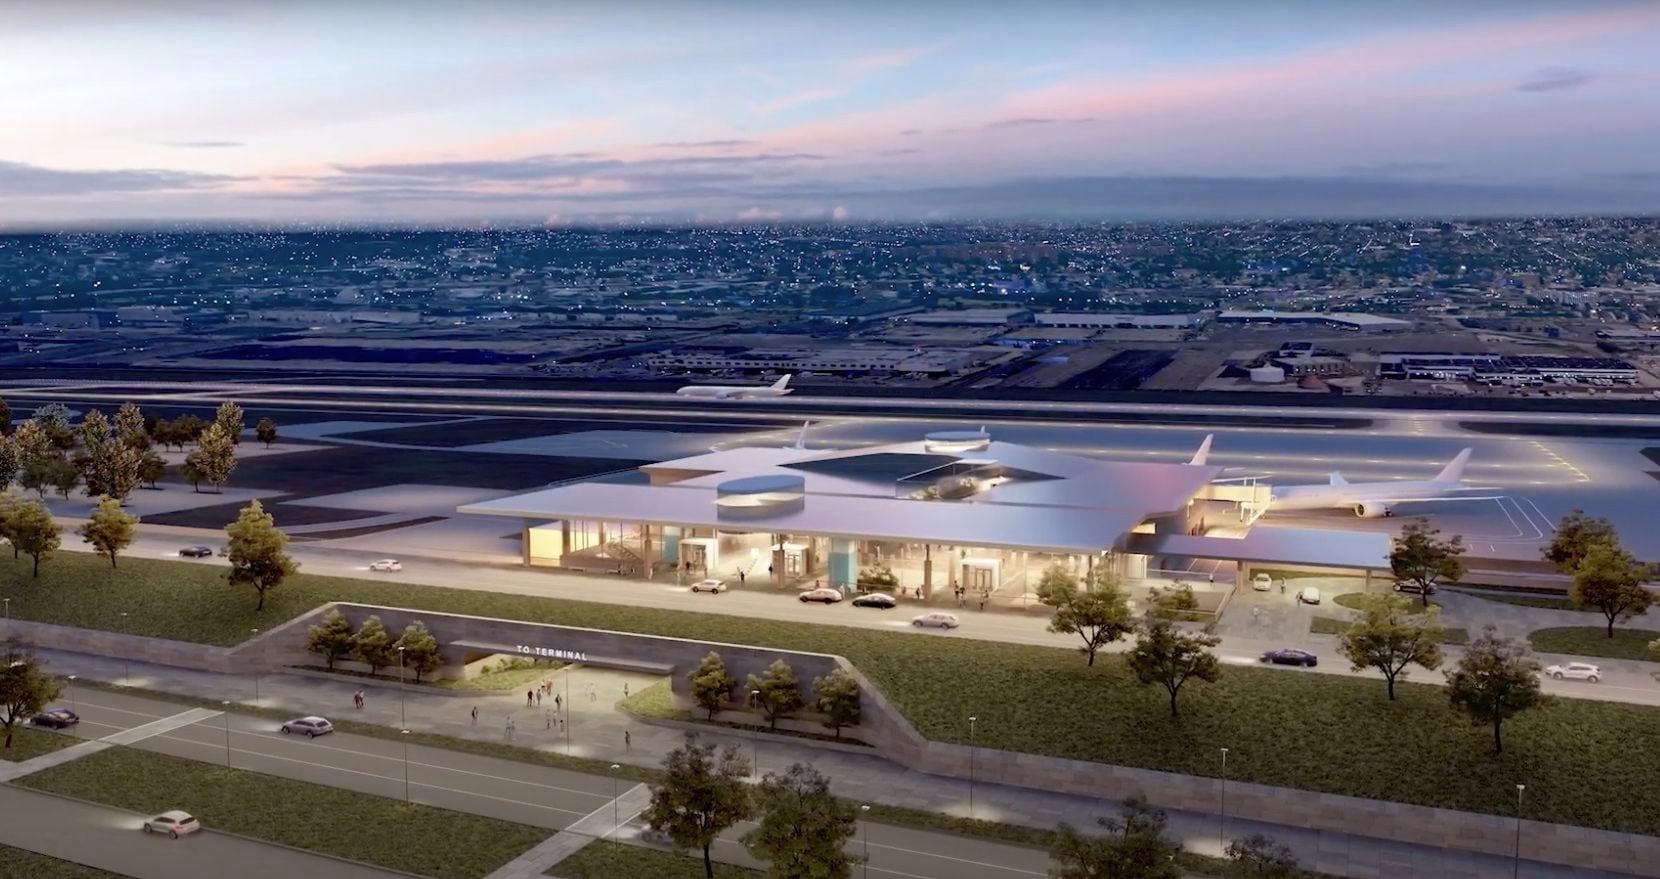 Renderings of a proposed new commercial airline terminal at McKinney National Airport...